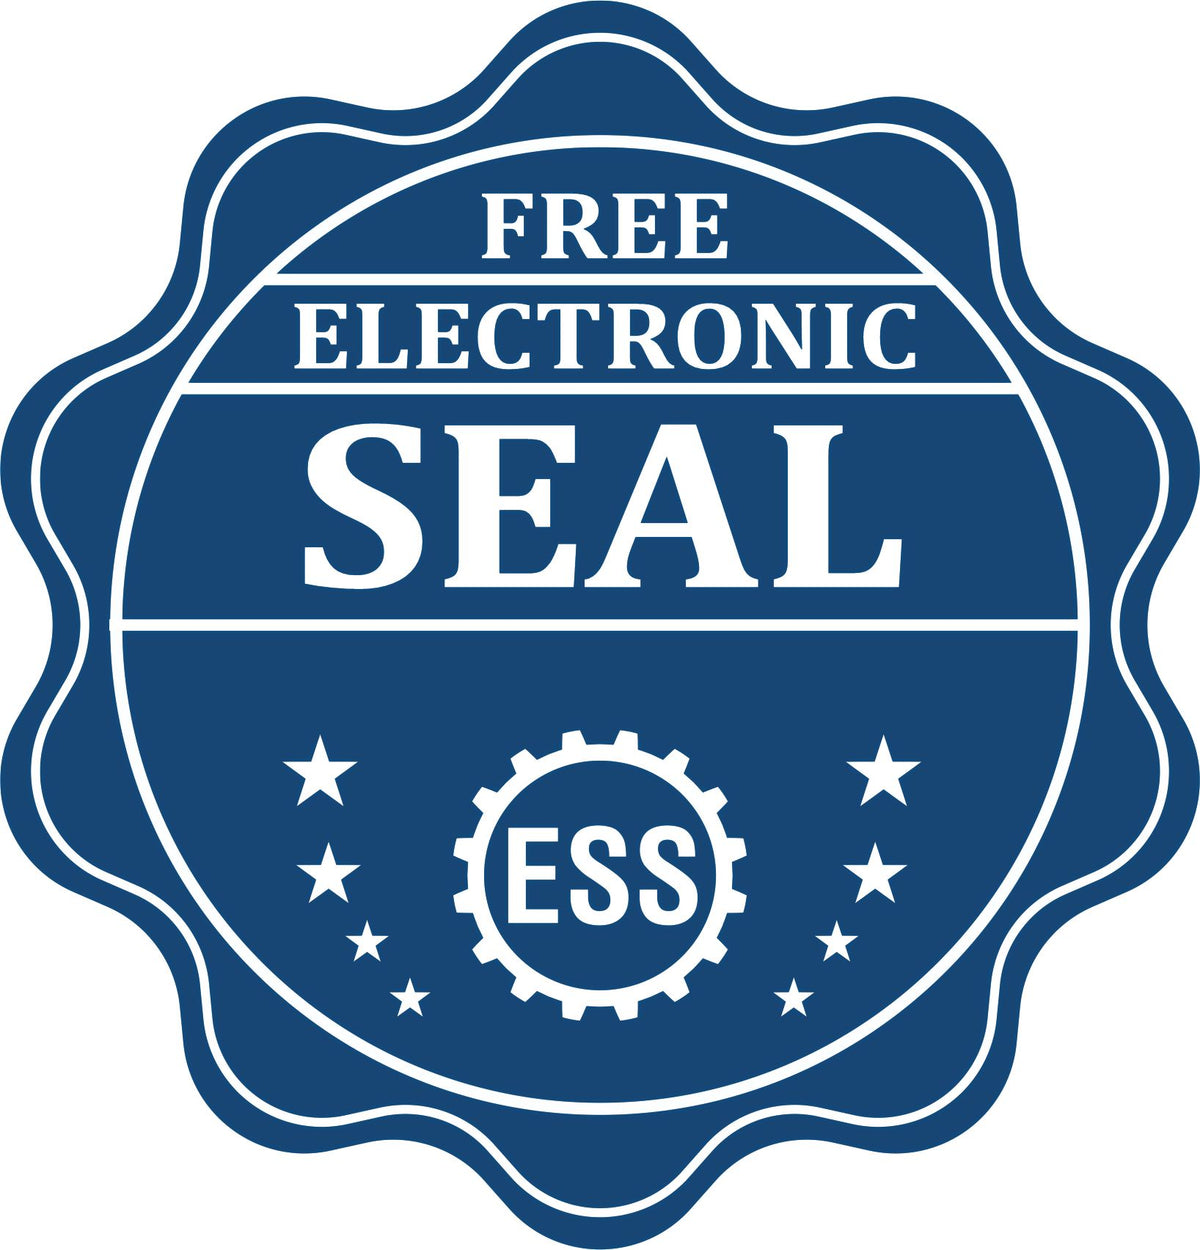 A badge showing a free electronic seal for the Heavy-Duty Wisconsin Rectangular Notary Stamp with stars and the ESS gear on the emblem.